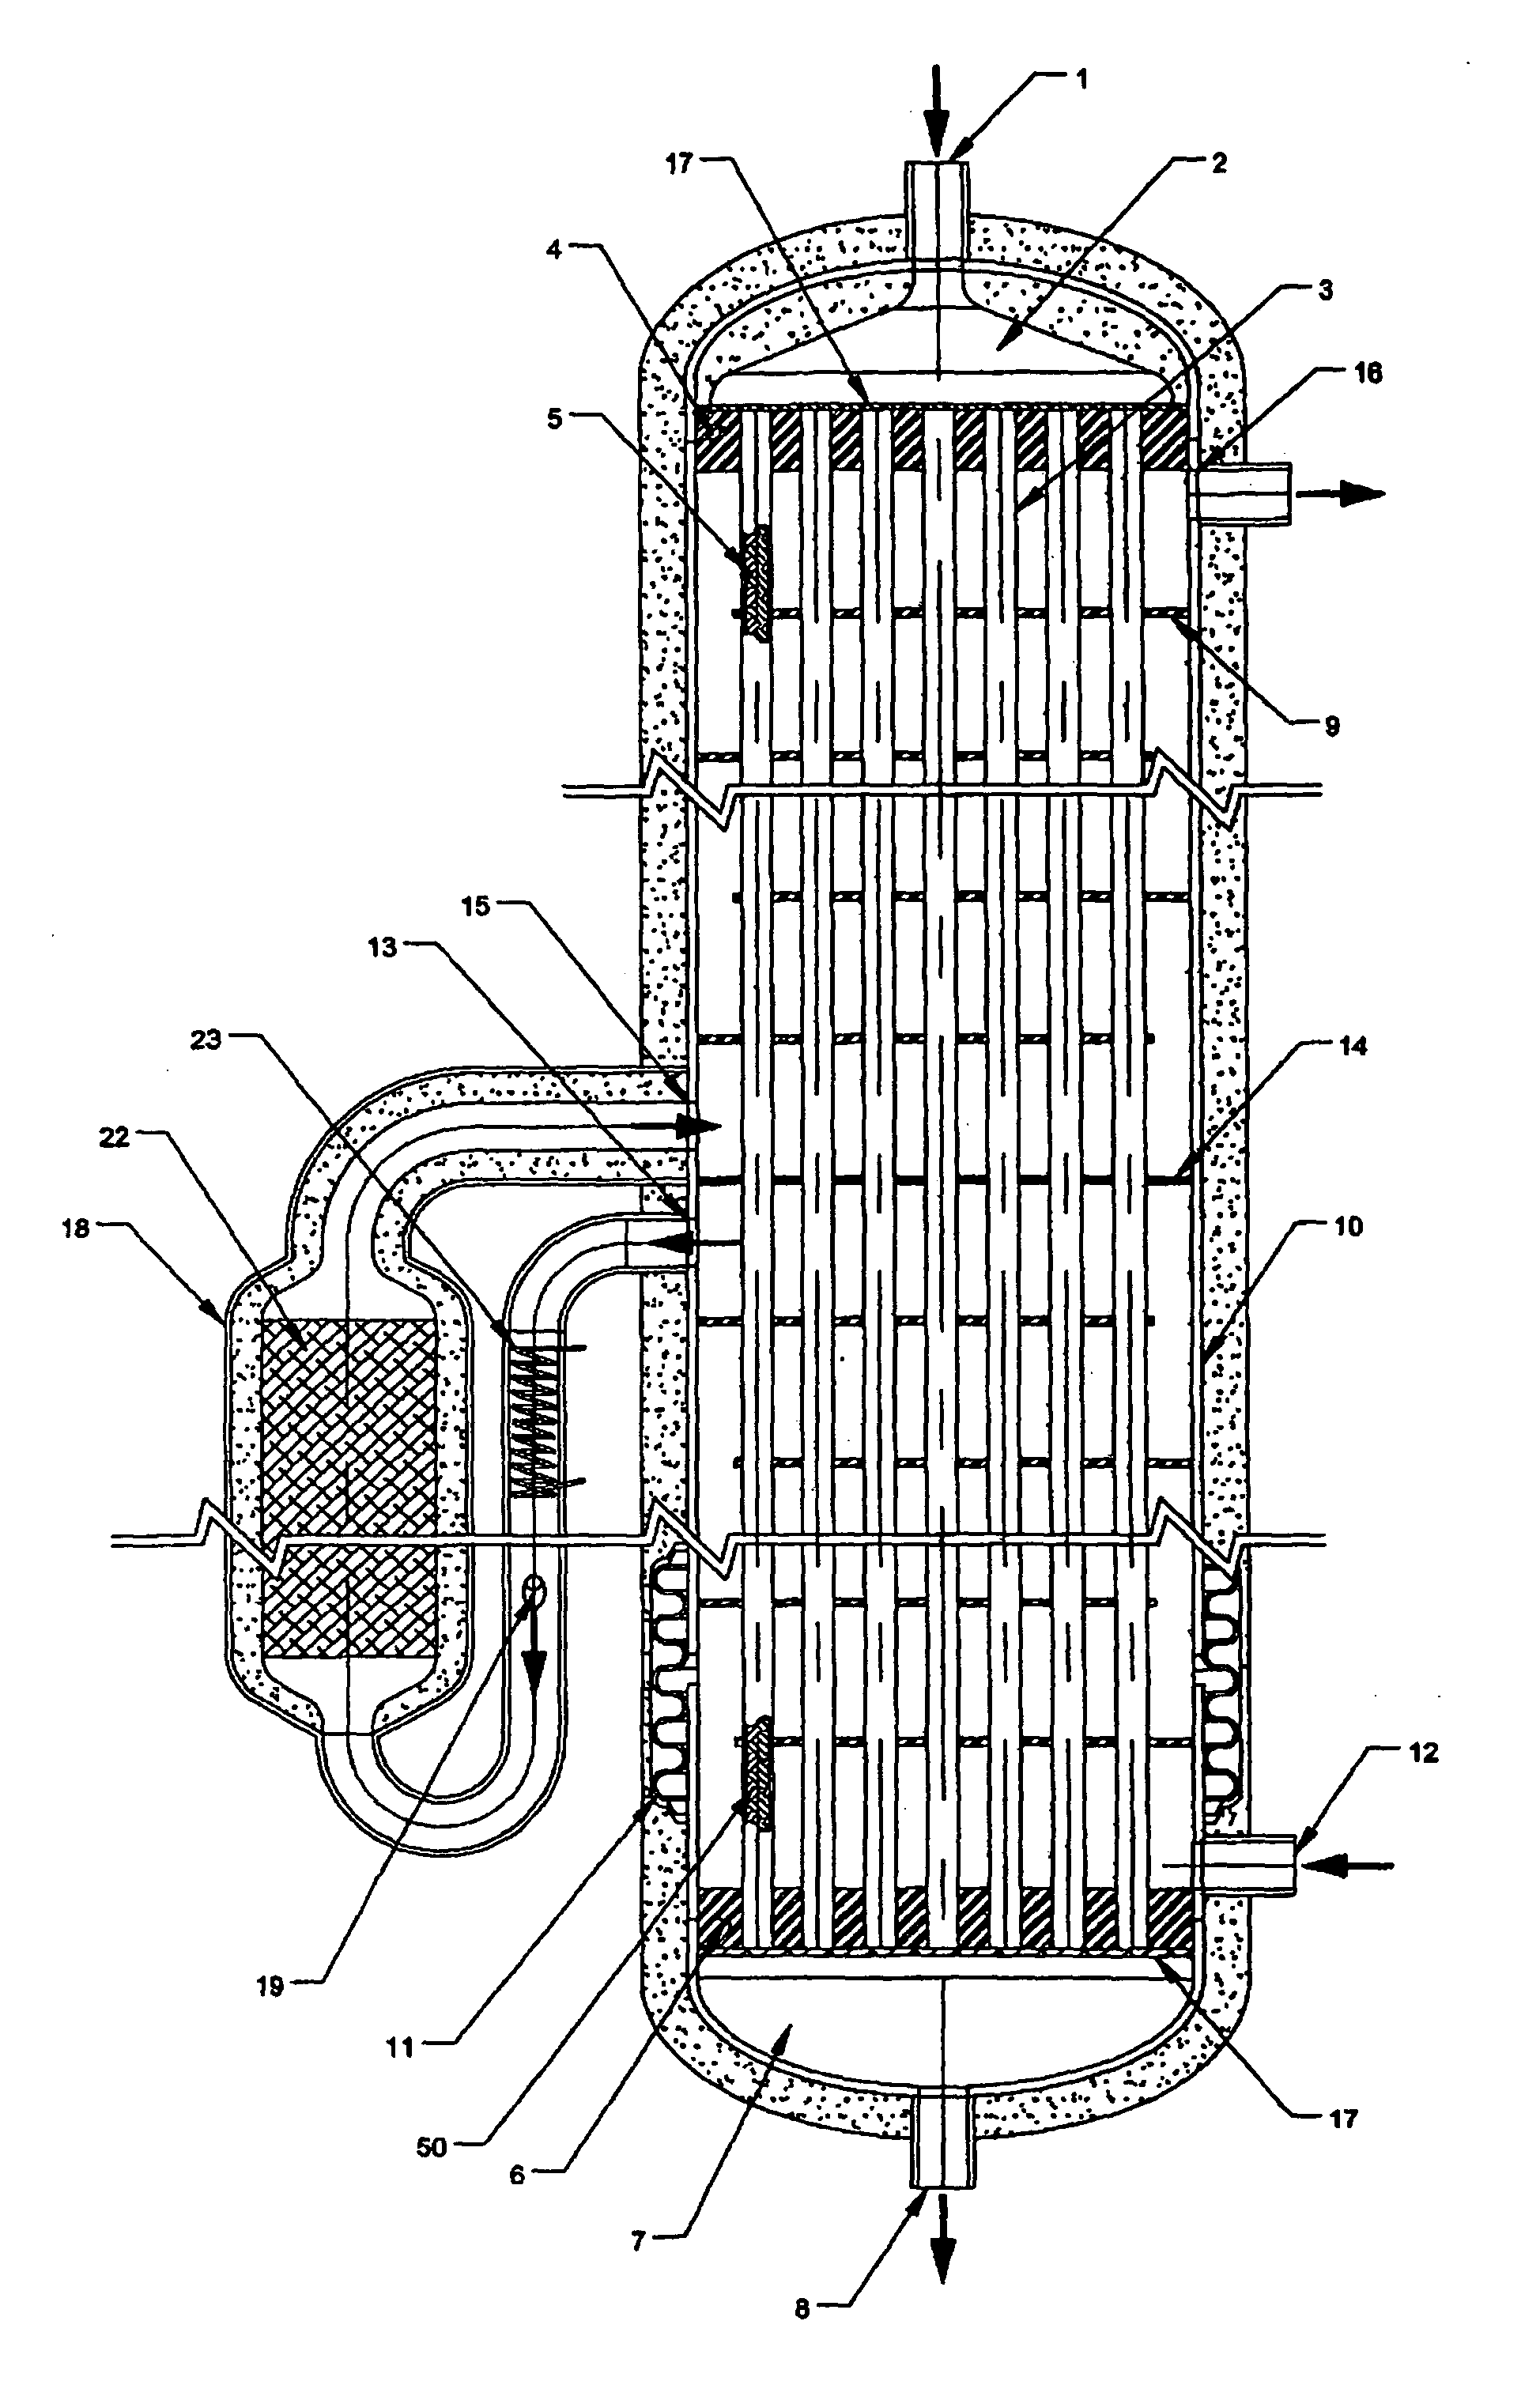 System for hydrogen generation through steam reforming of hydrocarbons and intergrated chemical reactor for hydrogen production from hydrocarbons